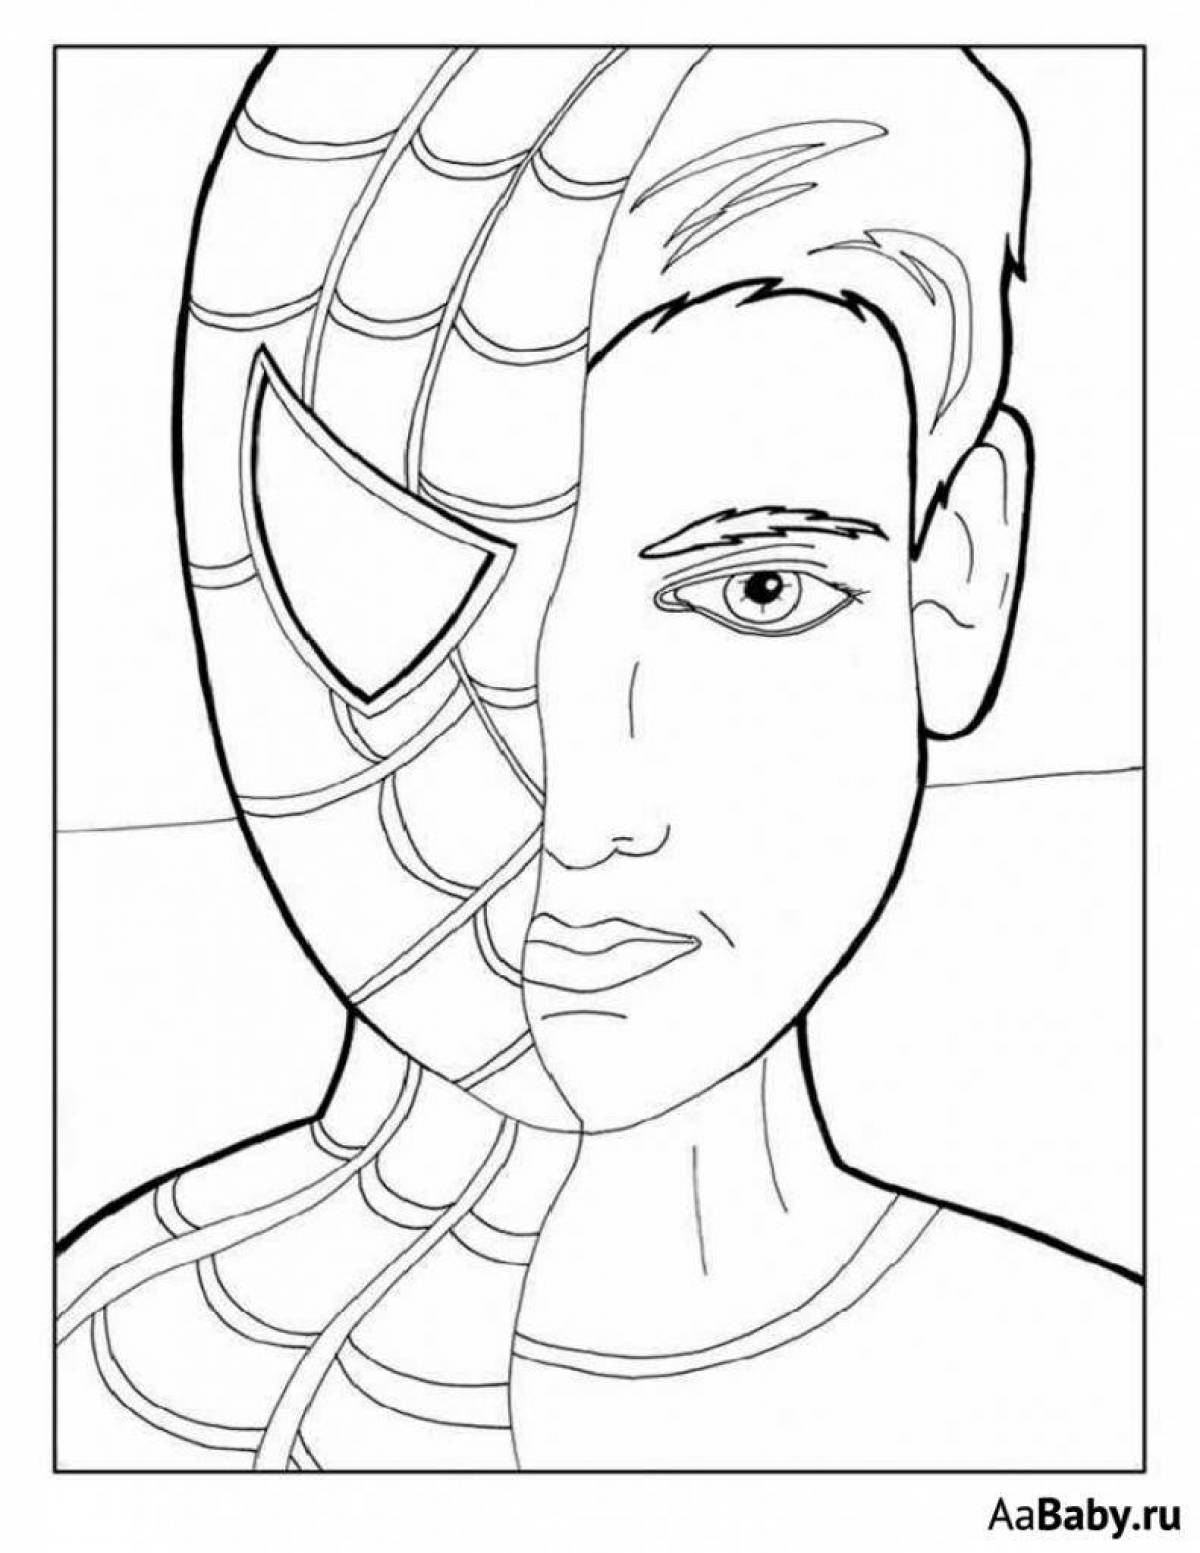 Coloring book for confident man